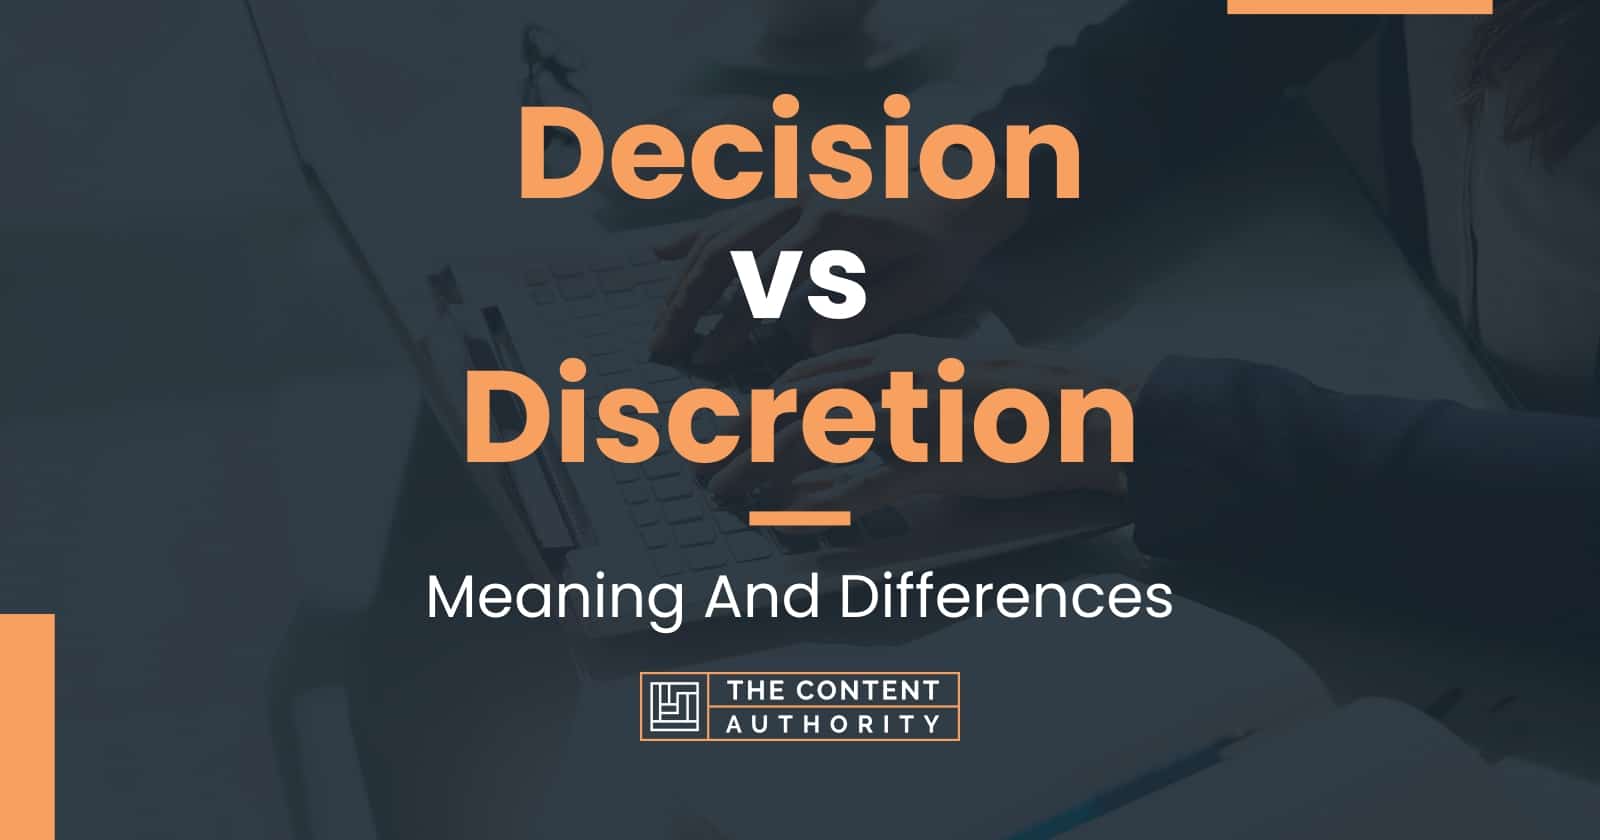 Decision vs Discretion: Meaning And Differences